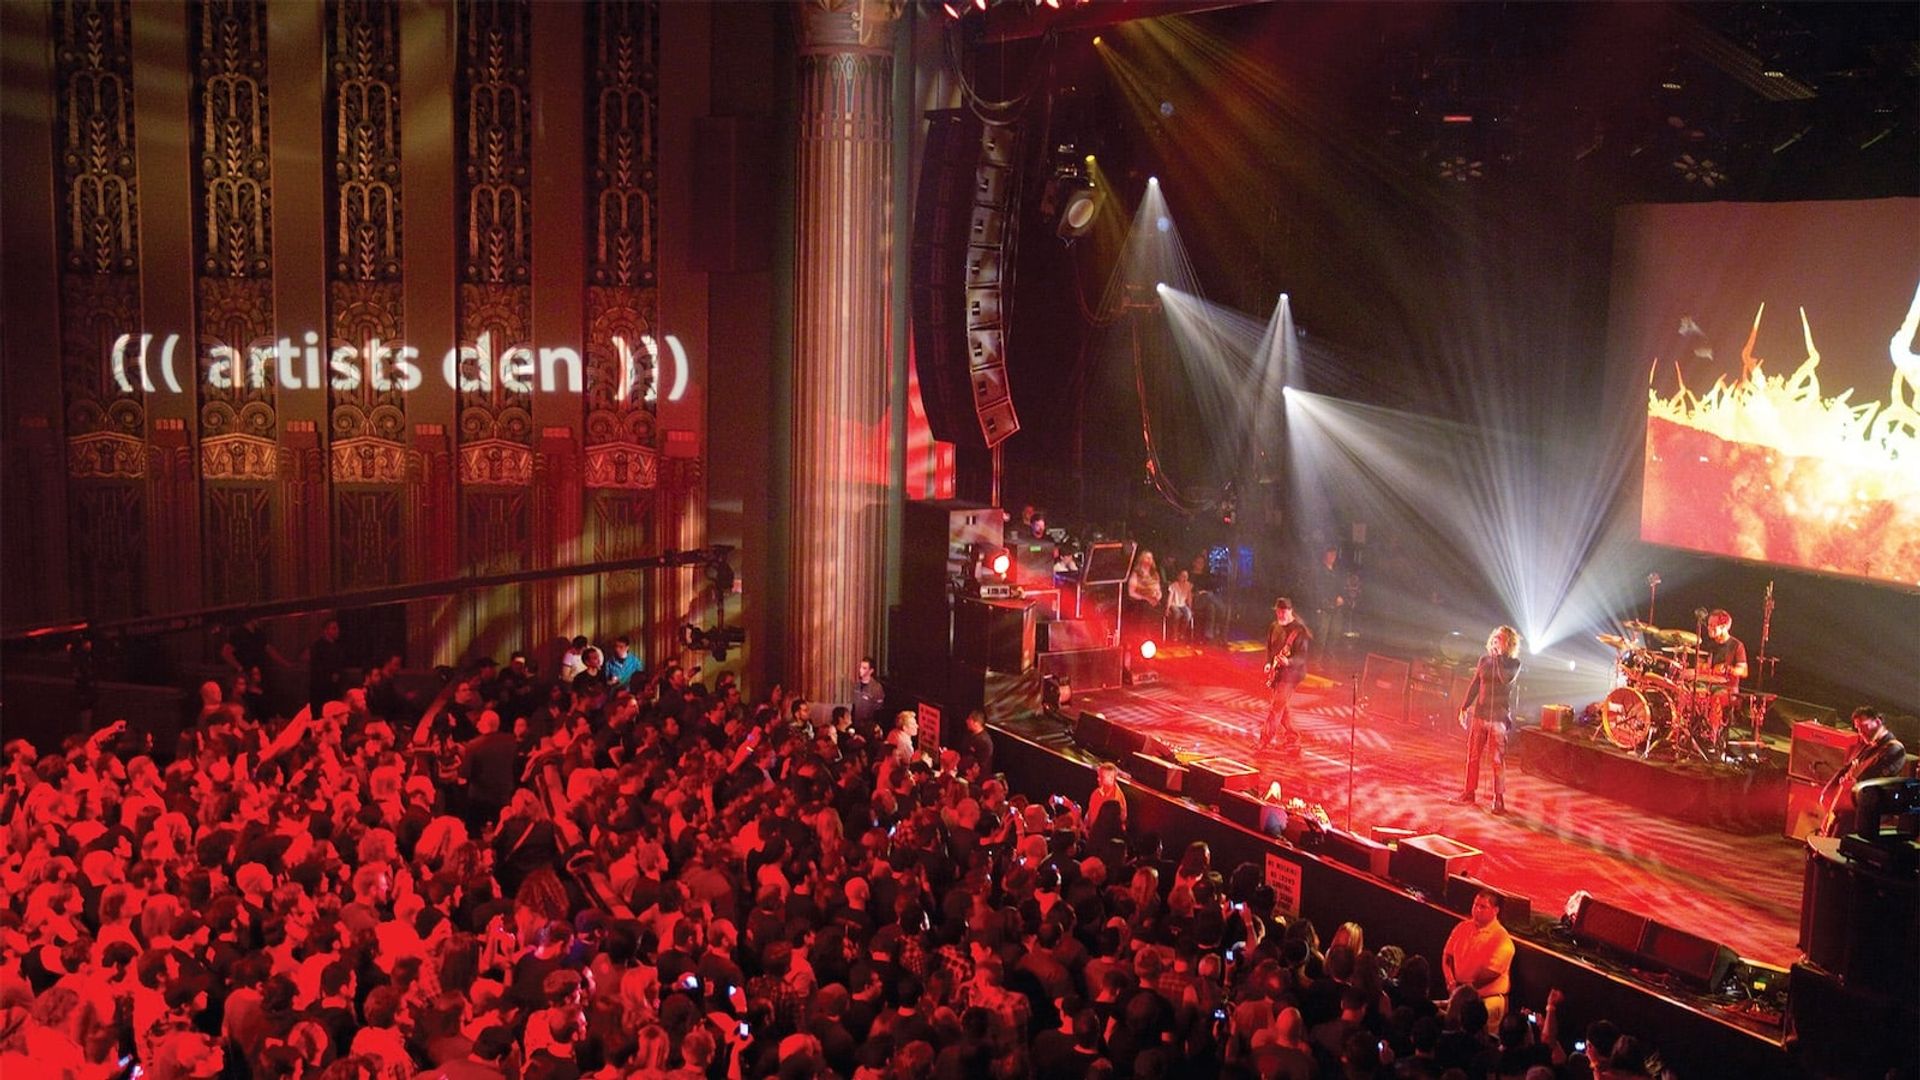 Soundgarden: Live from the Artists Den - The IMAX Experience background